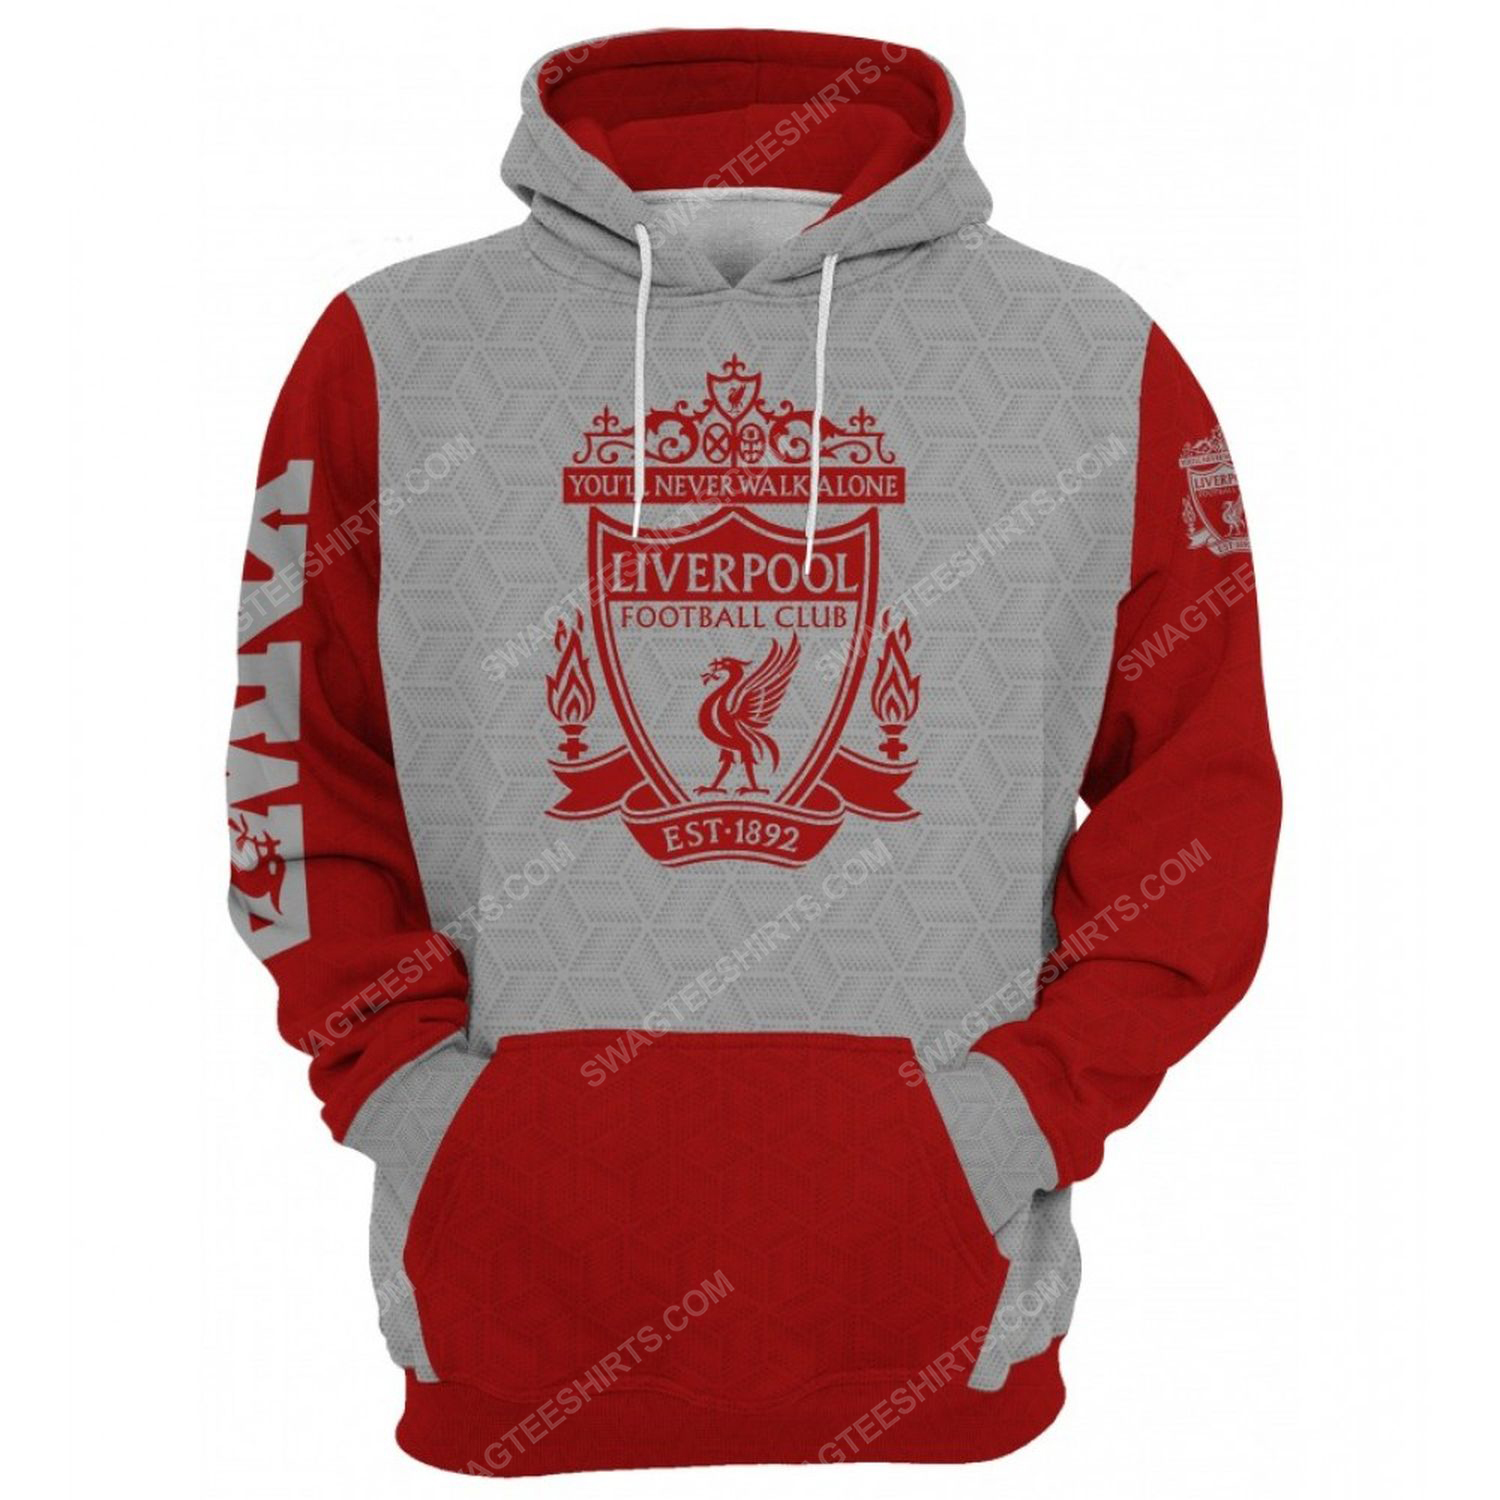 [special edition] You’ll never walk alone liverpool football club all over print shirt – maria